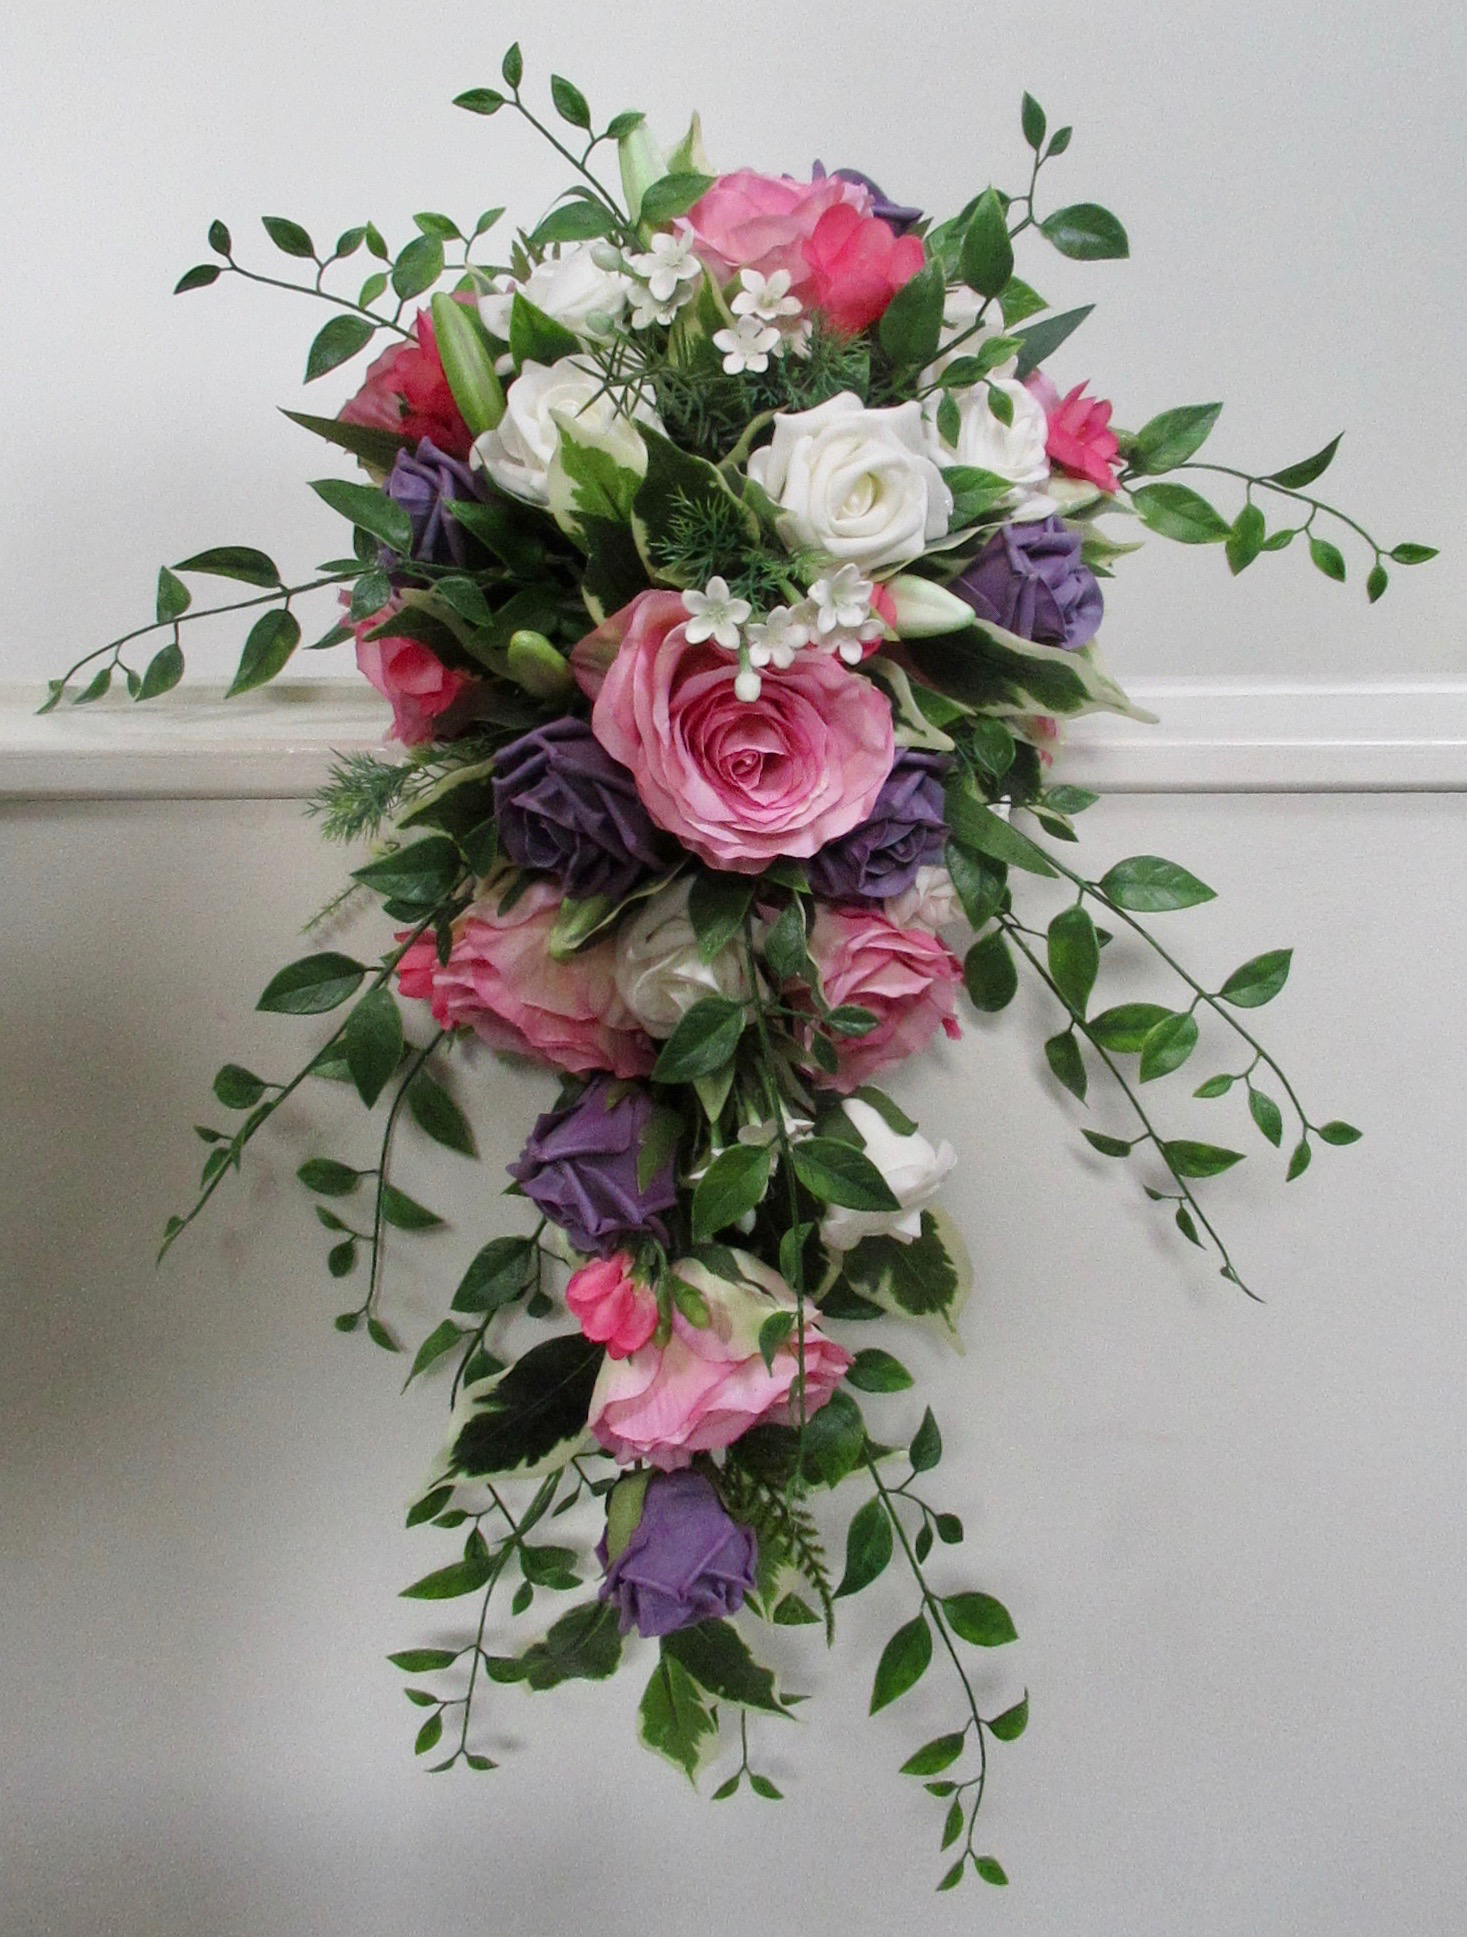 Beautiful Lifelike Bridal Shower Bouquet - Pink silk roses with ivory & purple polyfoam roses, mini stephanotis, various foliage and mini leaf sprays - handle wrapped in choice of colour satin ribbon or hessian, lace or twine.